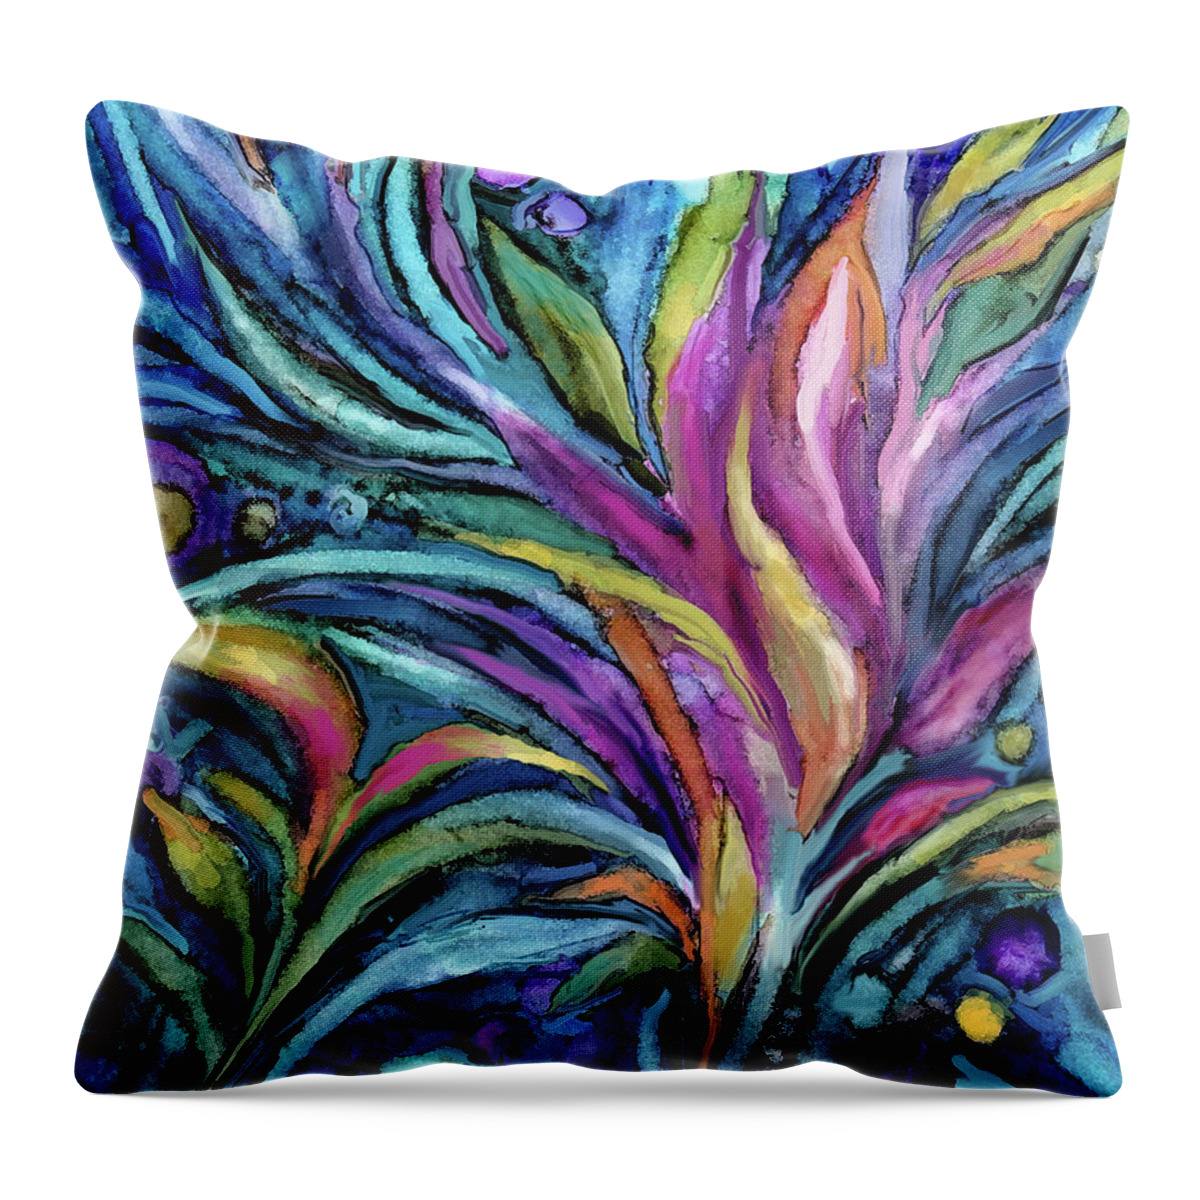 Colorful Alcohol Ink Throw Pillow featuring the digital art Flower Swaying by Jean Batzell Fitzgerald